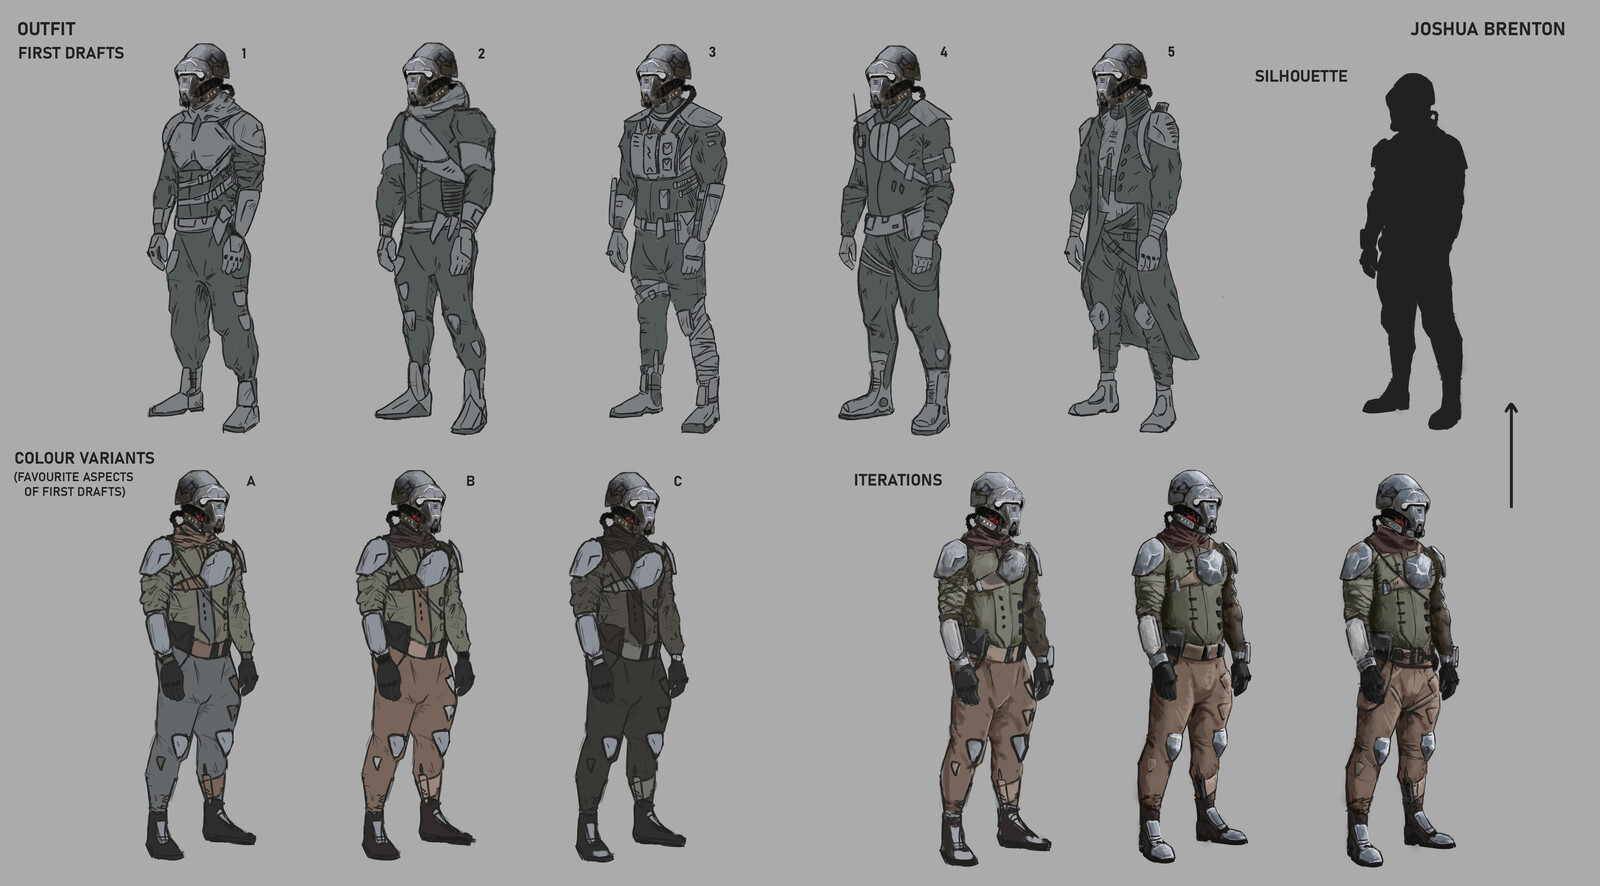 Variants of the character, colour variants based on scheme and iterations of final.